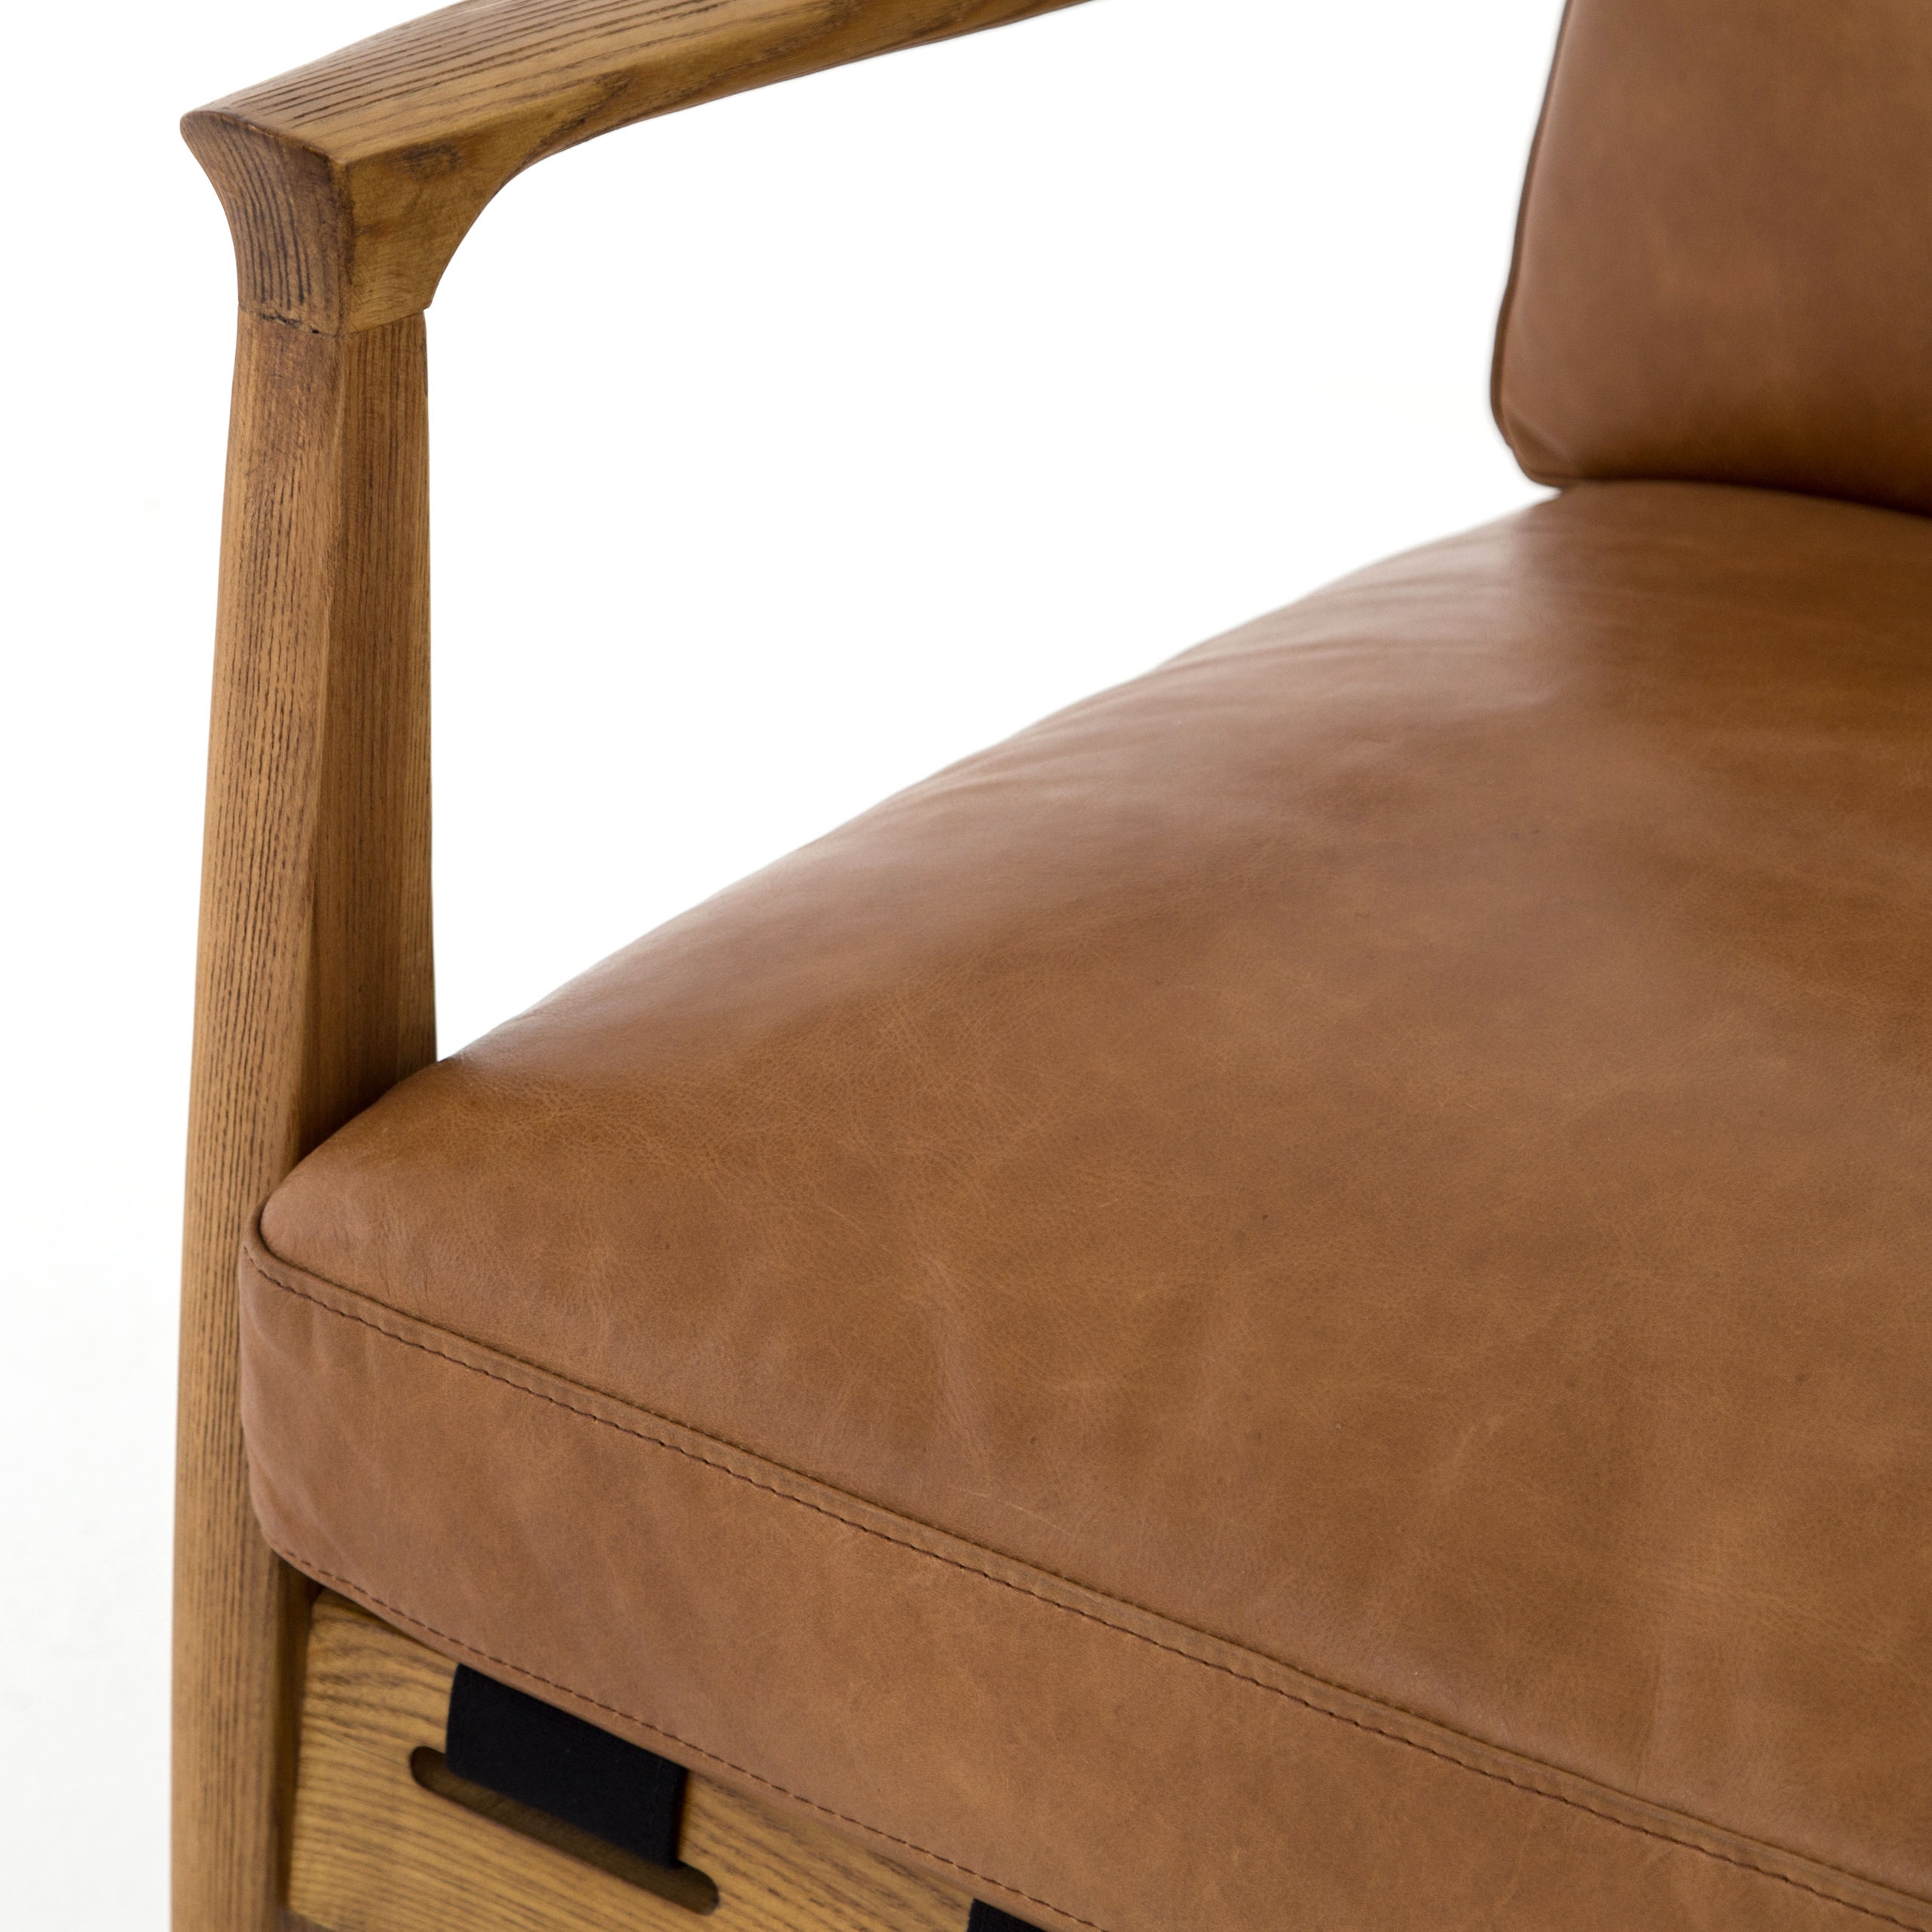 Kenneth Leather Chair - Image 8